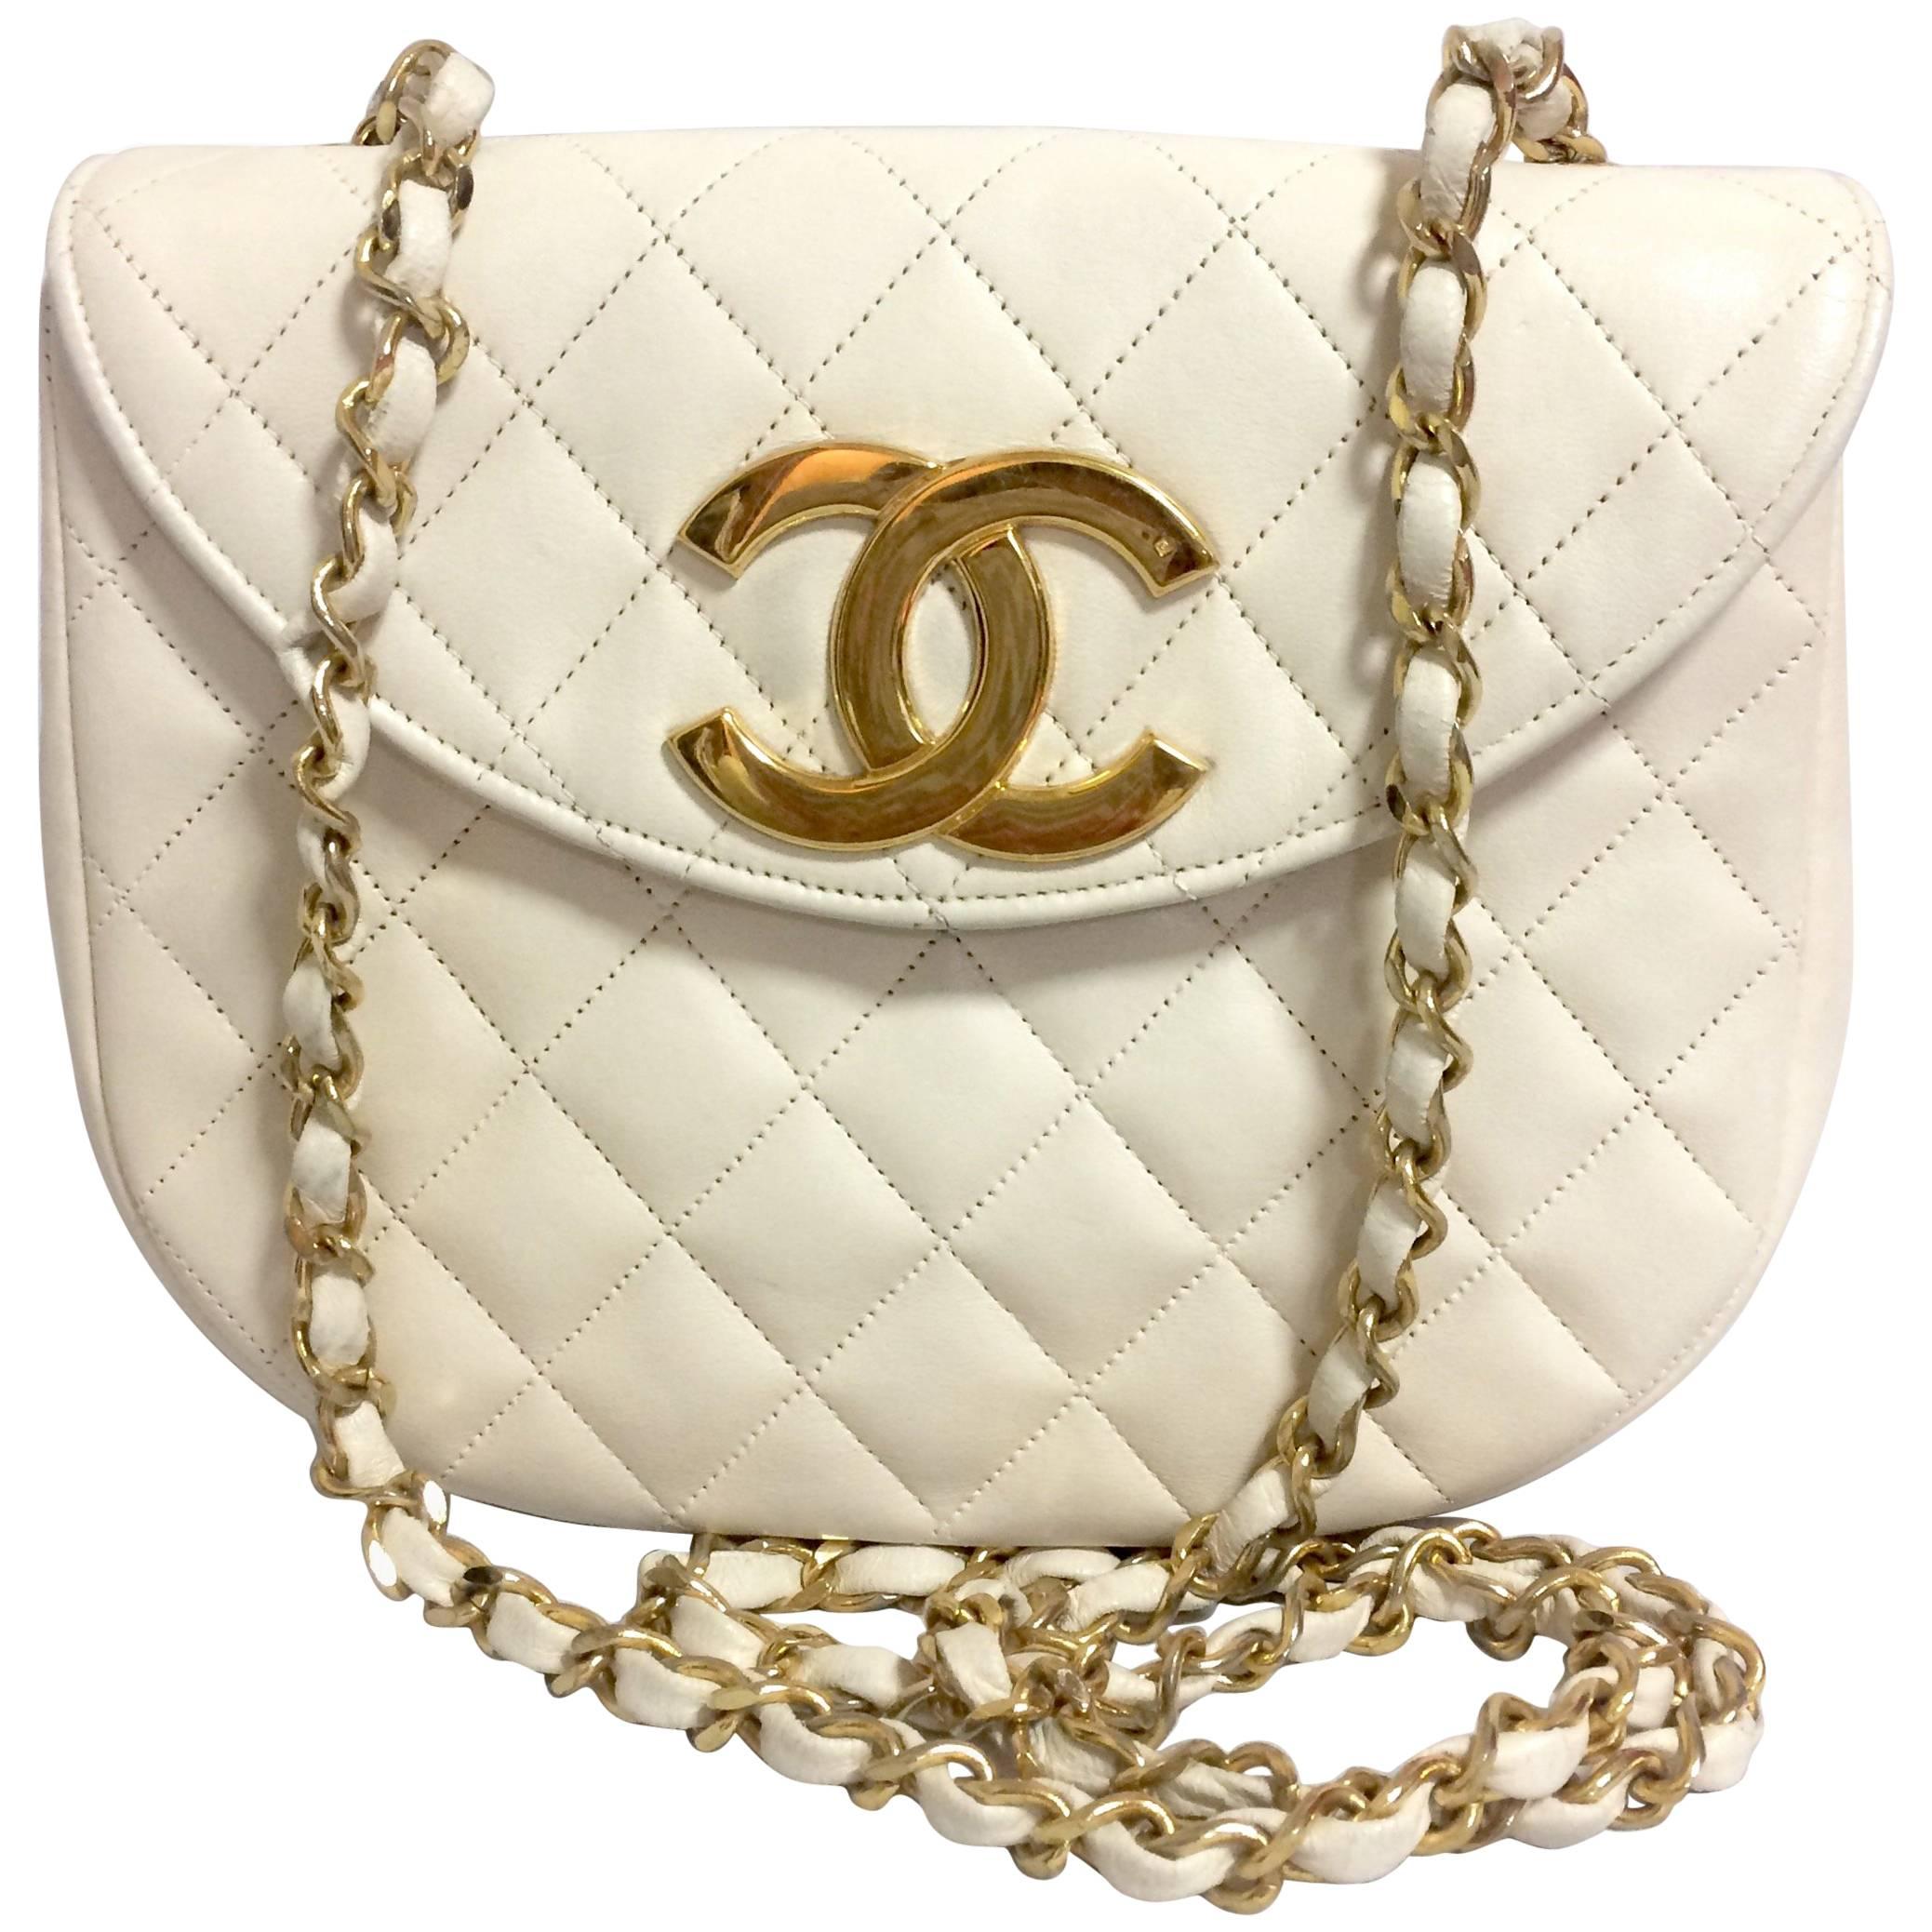 Vintage CHANEL ivory white lambskin 2.55 chain shoulder bag with gold CC motif.